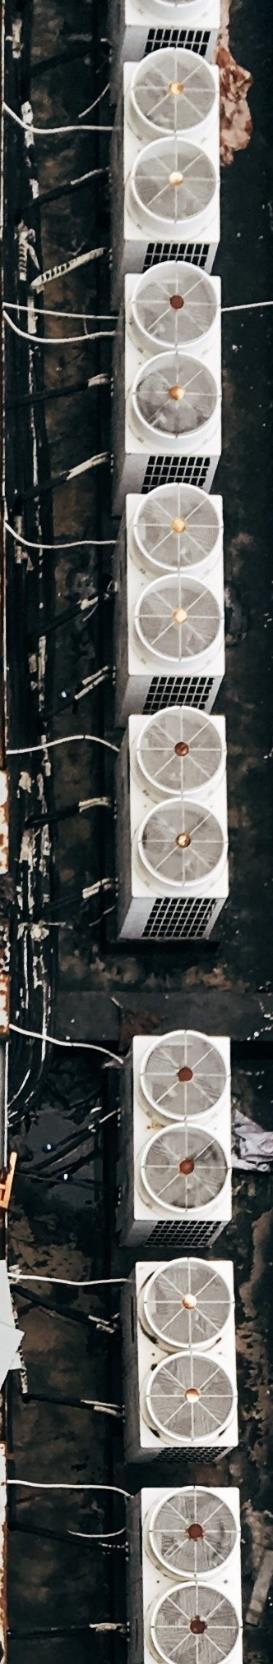 Cooling Devices Cooling Devices Ventilation efficiency: A ventilation system preserves a good indoor climate and ensures that high air quality is maintained to control